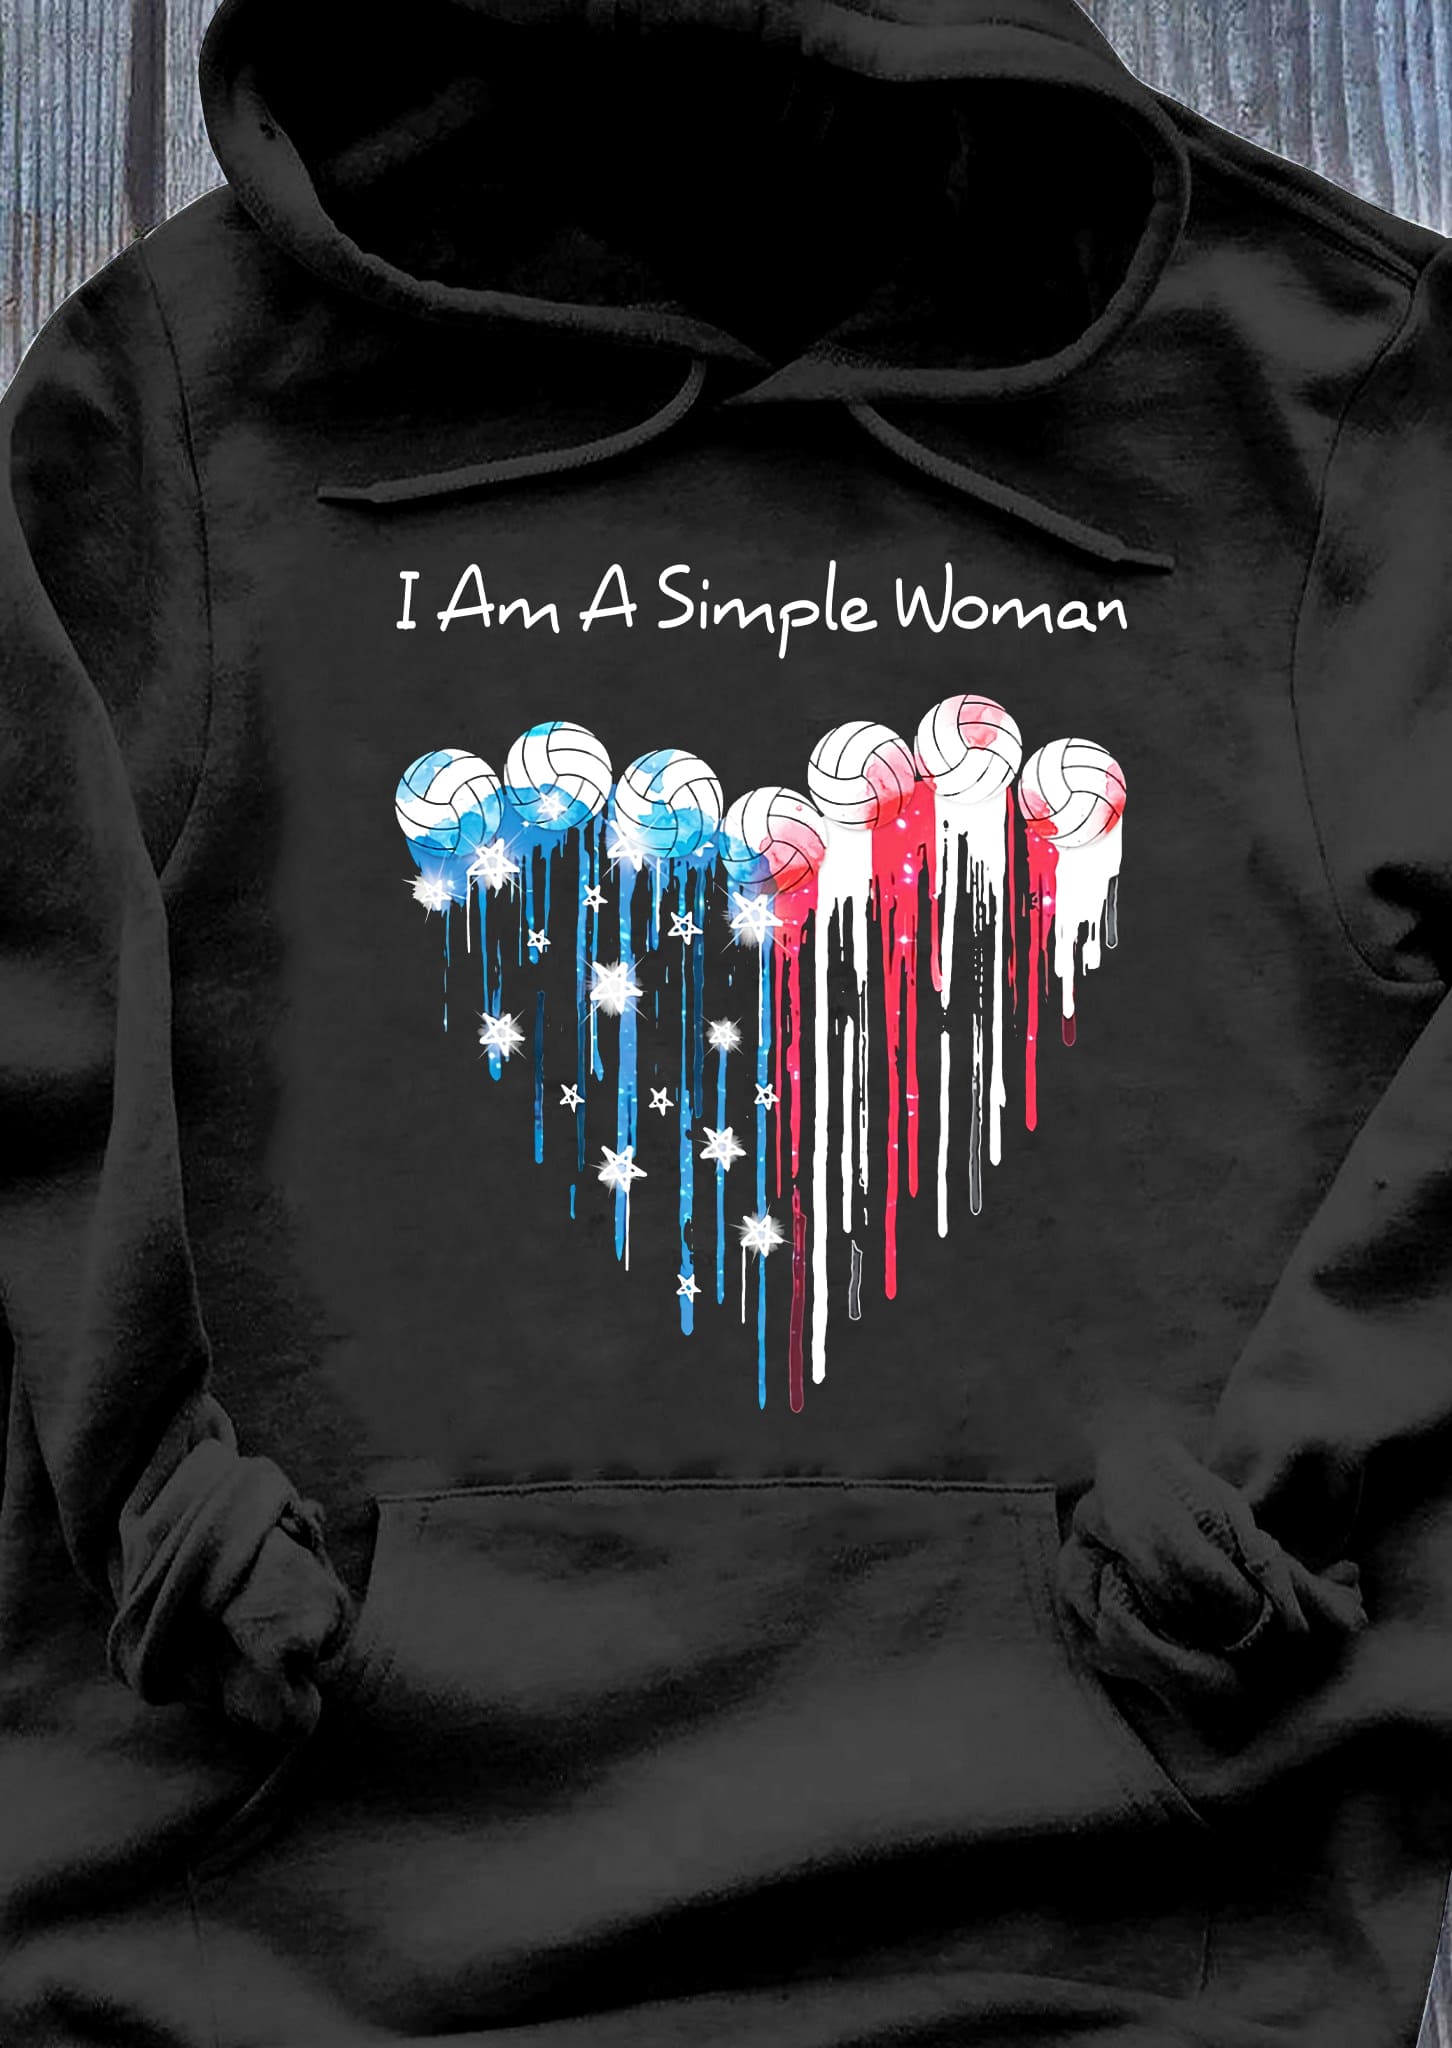 I am a simple woman - Woman volleyball player, woman loves playing volleyball